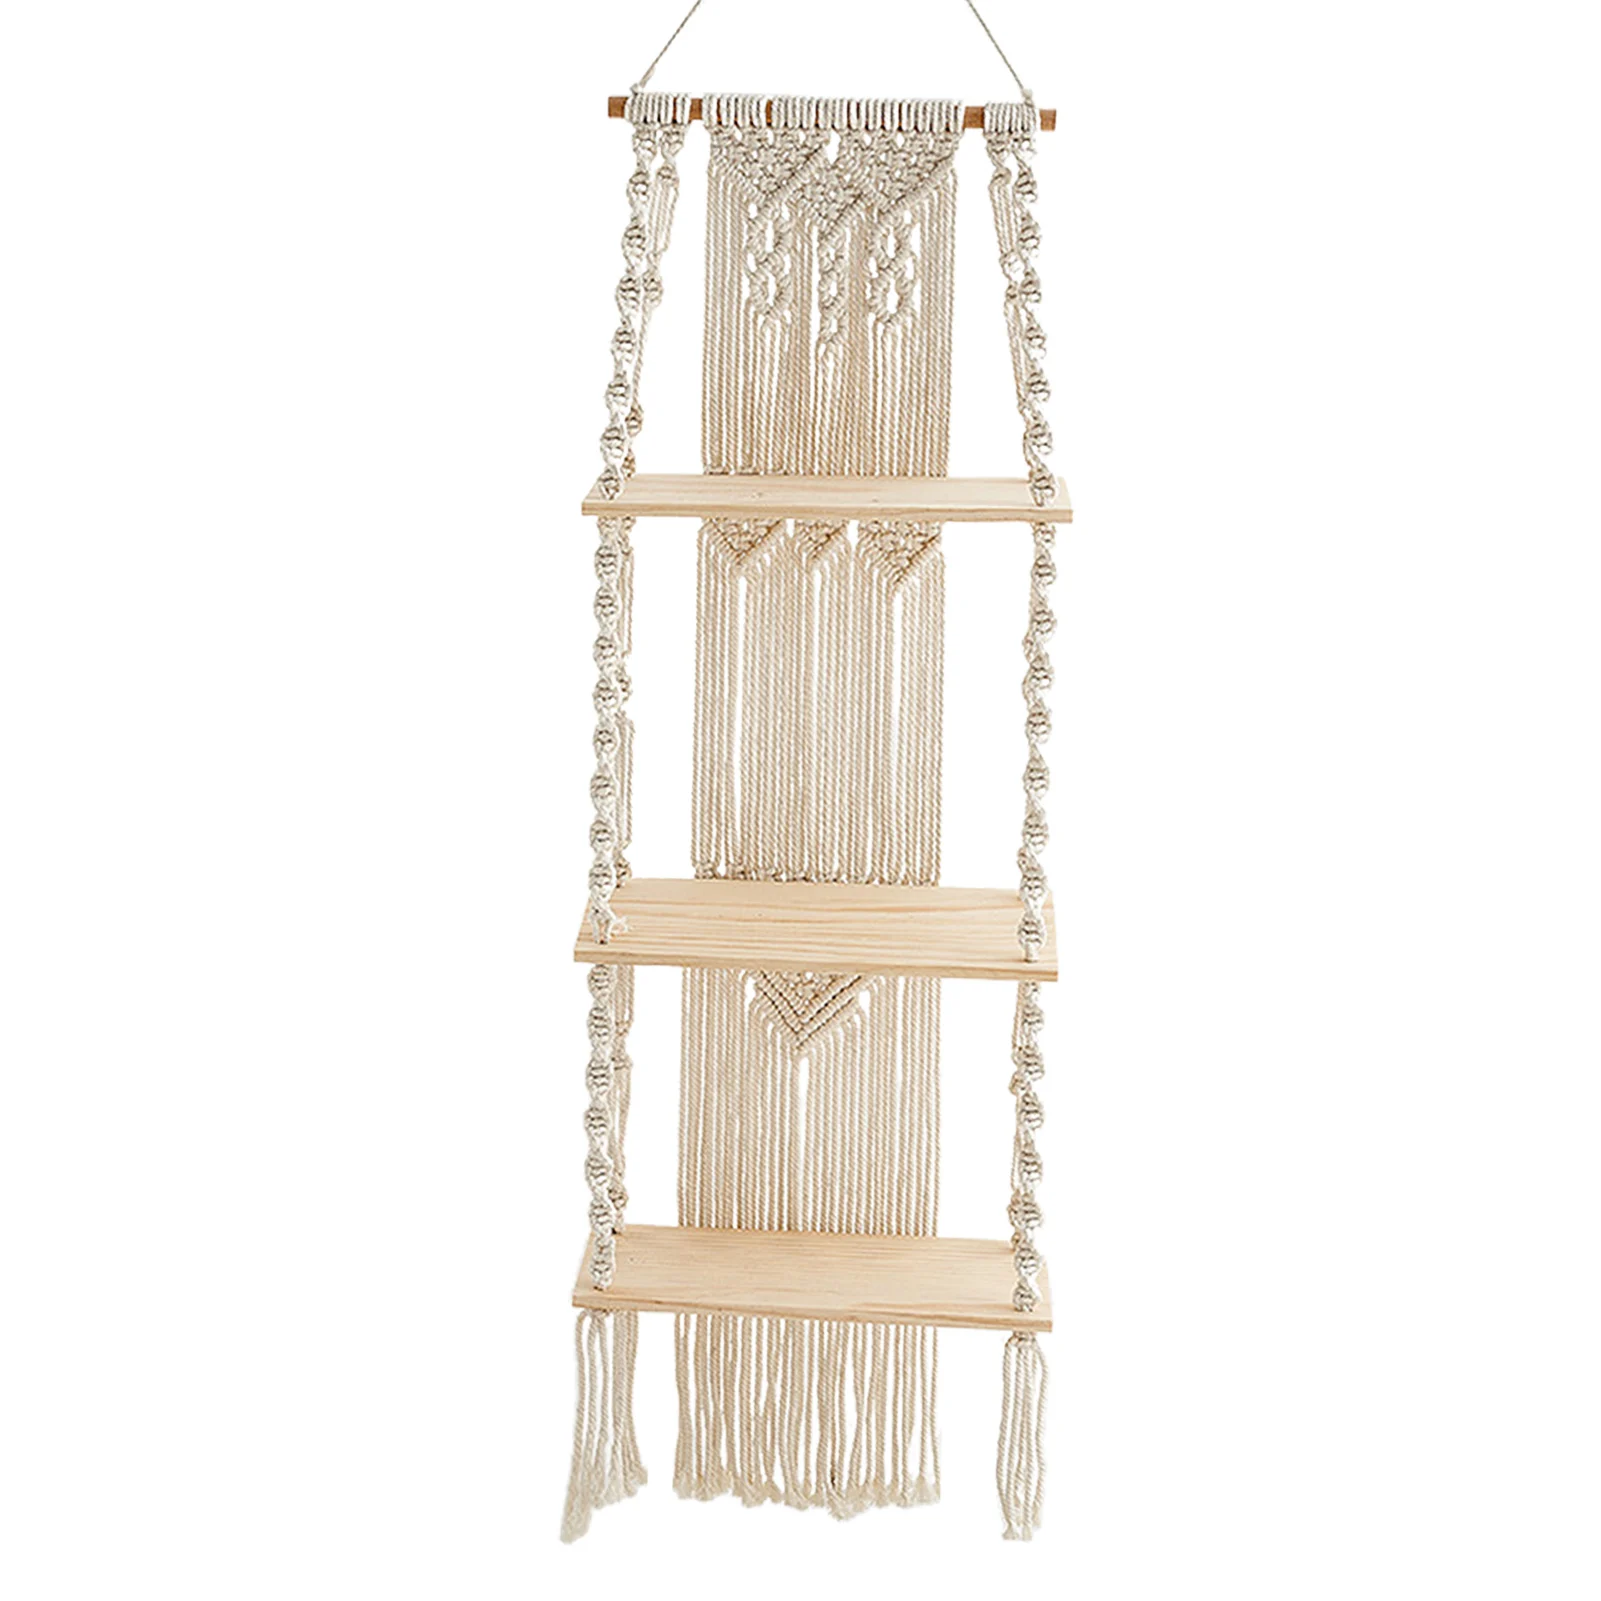 

Macrame Wall Decoration Hand-Woven Tapestry Cotton Rope Wall Hangings Shelves Woven Rope Holder For Bedroom Bathroom Bookshelf